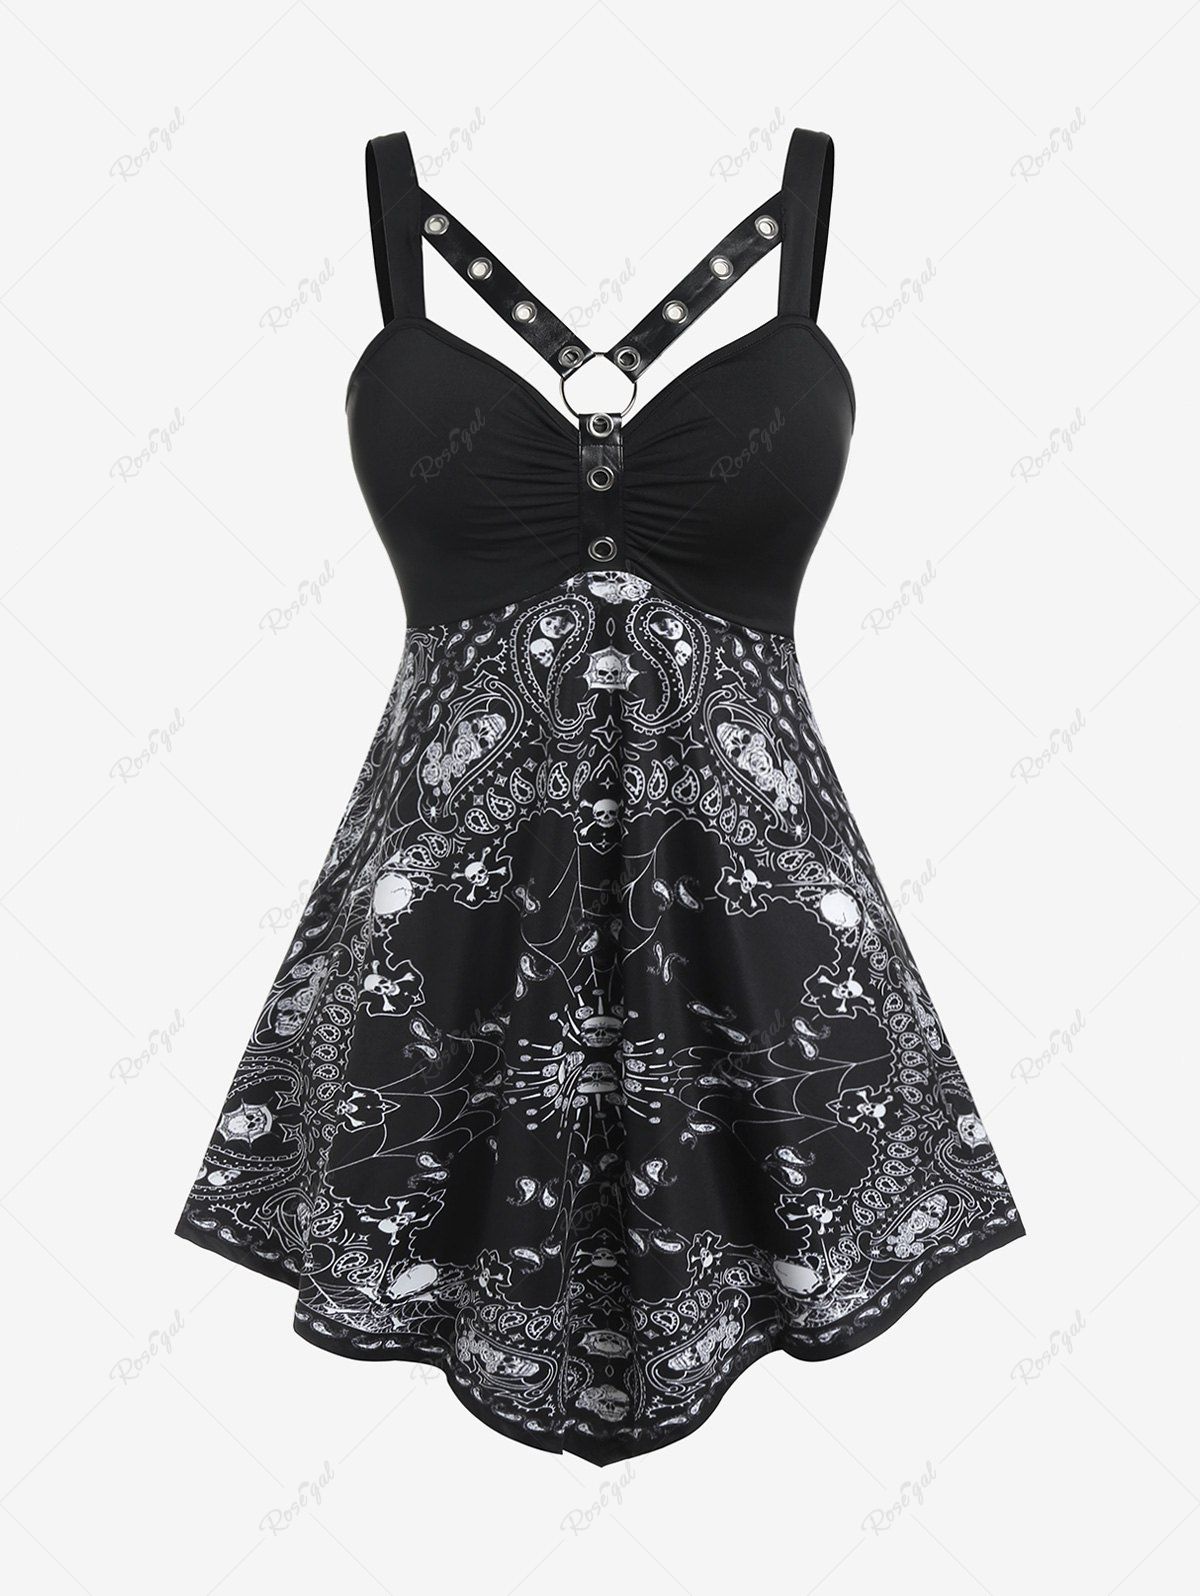 Buy Plus Size Paisley Skull Print Harness Gothic Tank Top  